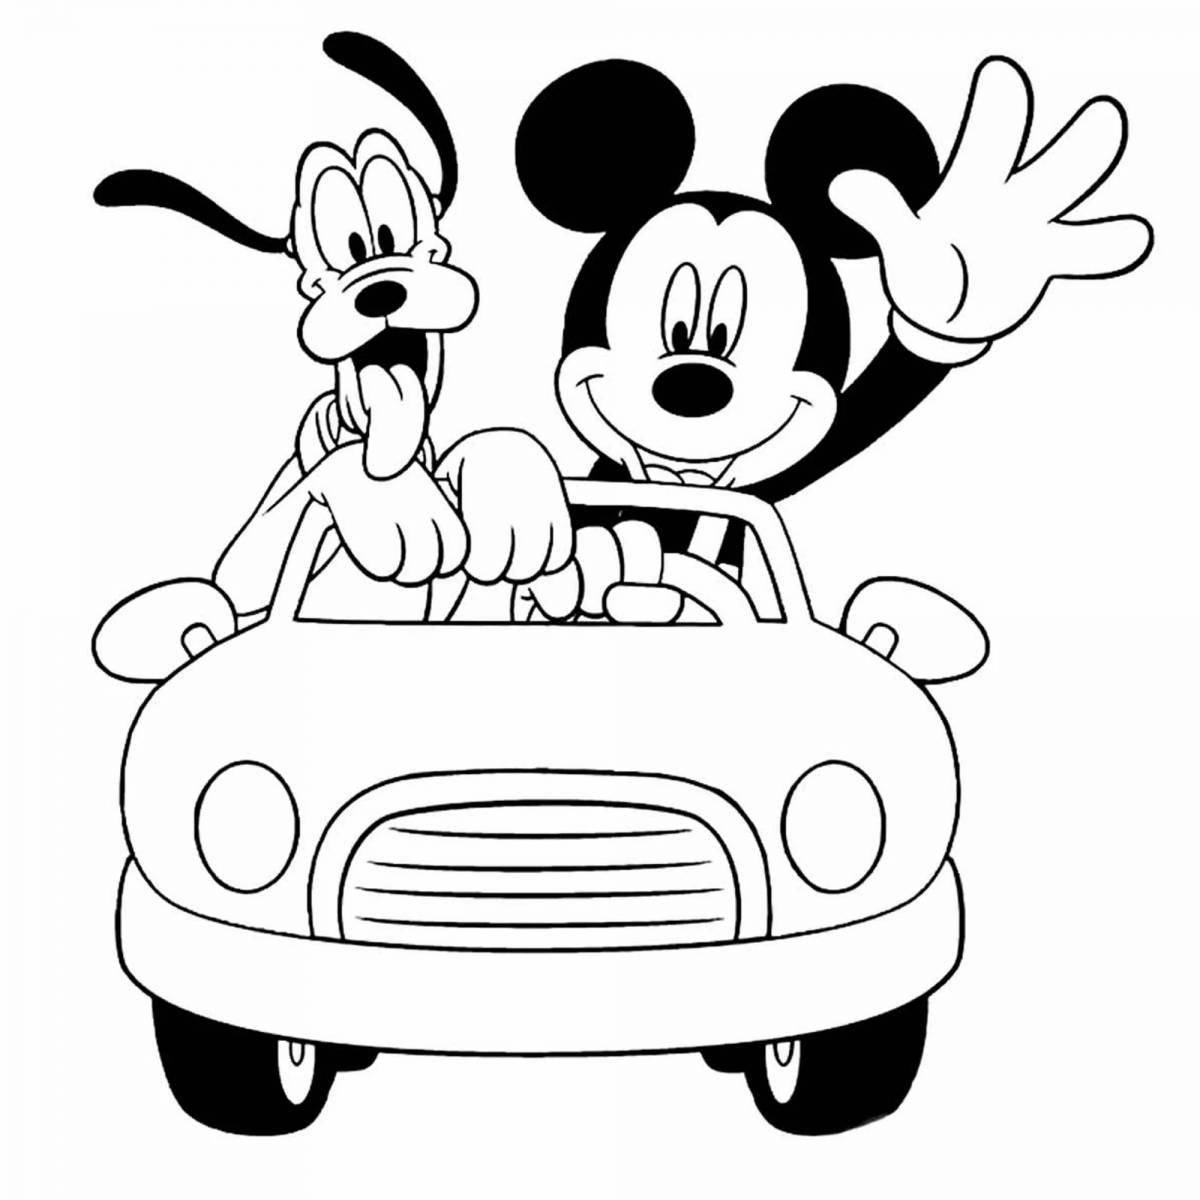 Incredible mickey mouse coloring book for boys